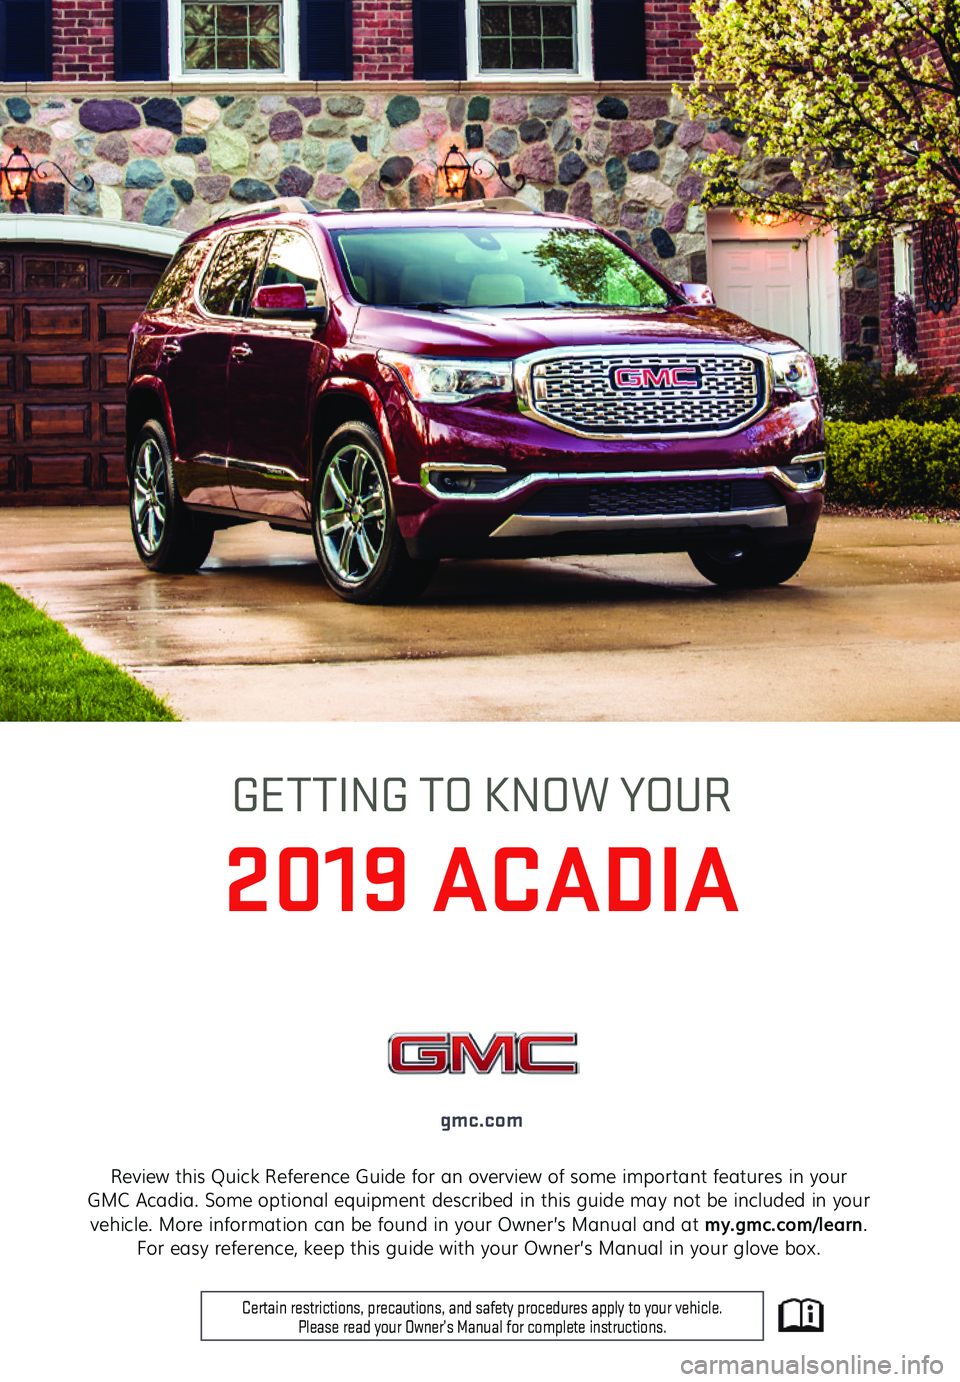 GMC ACADIA 2019  Get To Know Guide Review this Quick Reference Guide for an overview of some important features in your GMC Acadia. Some optional equipment described in this guide may not be included in your vehicle. More information c